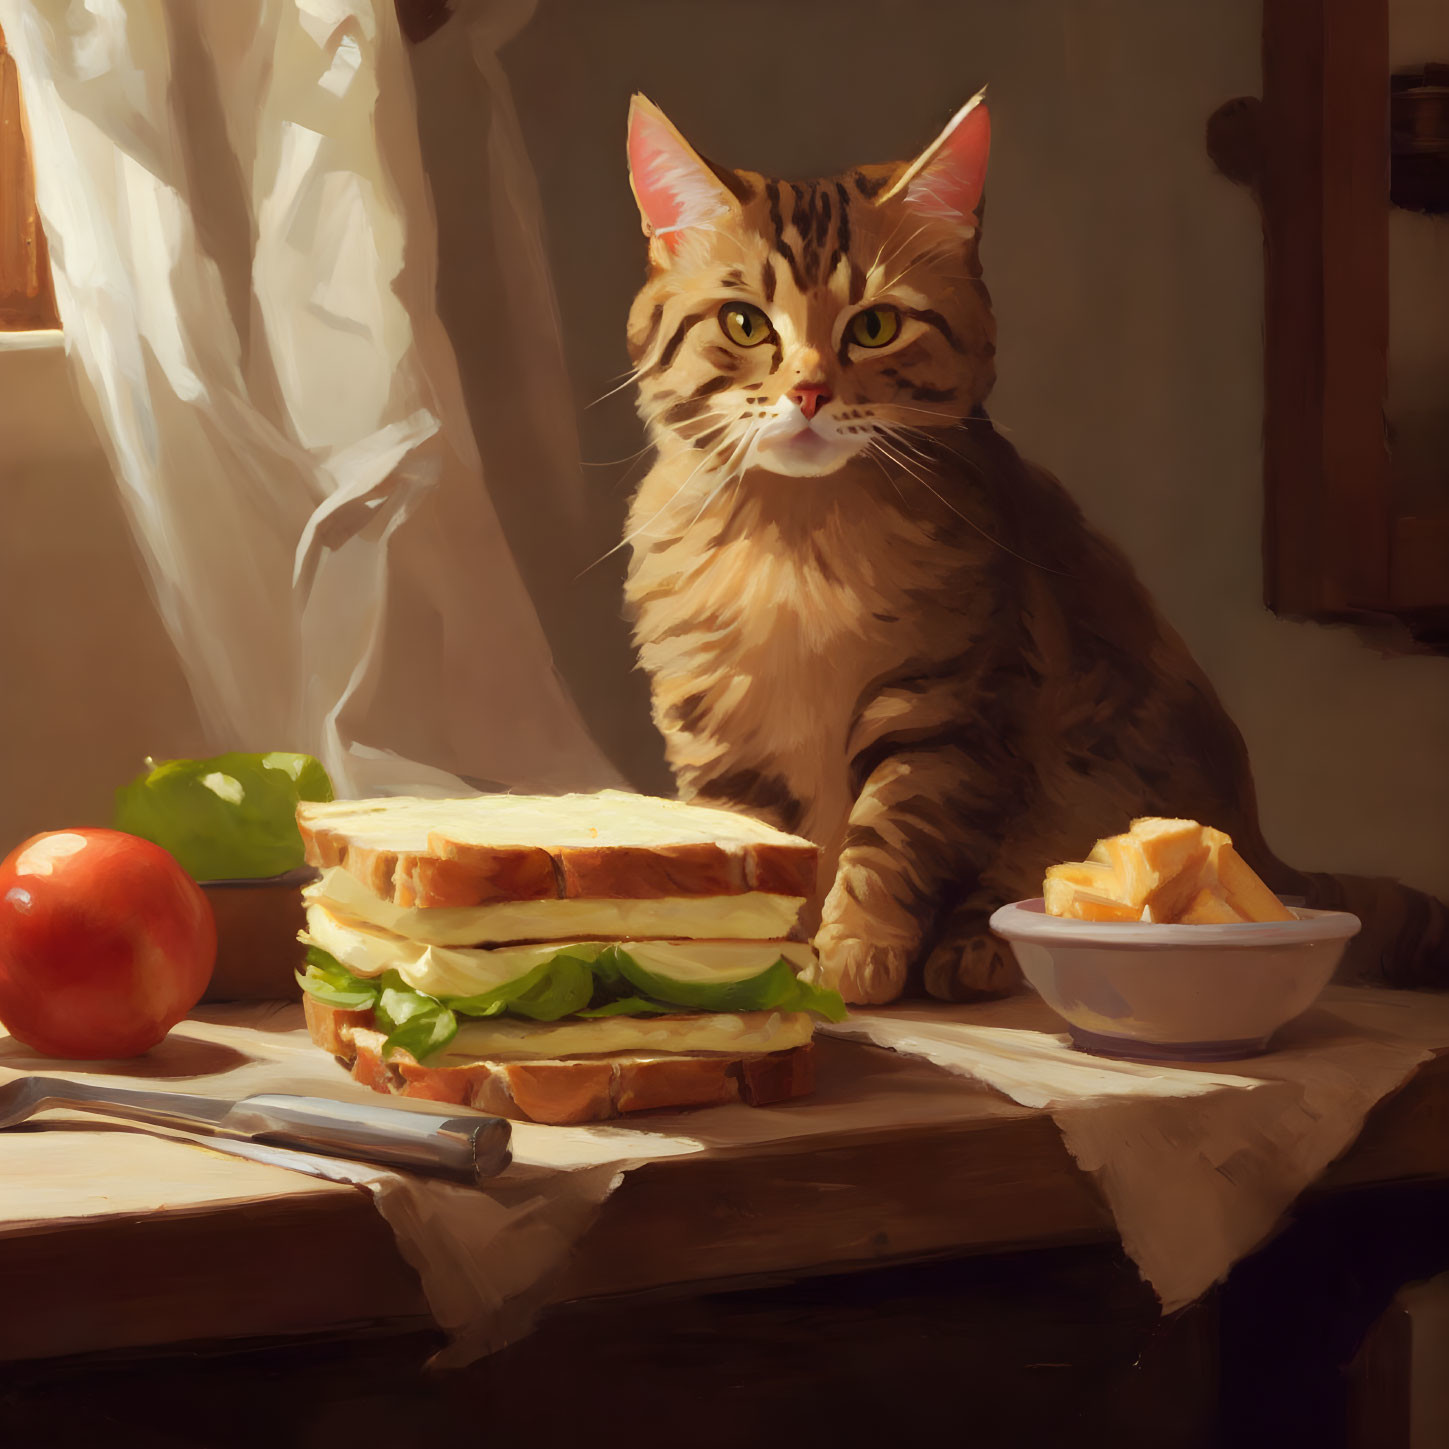 Tabby Cat with Sandwich, Apple, Greens, and Chips on Sunny Table